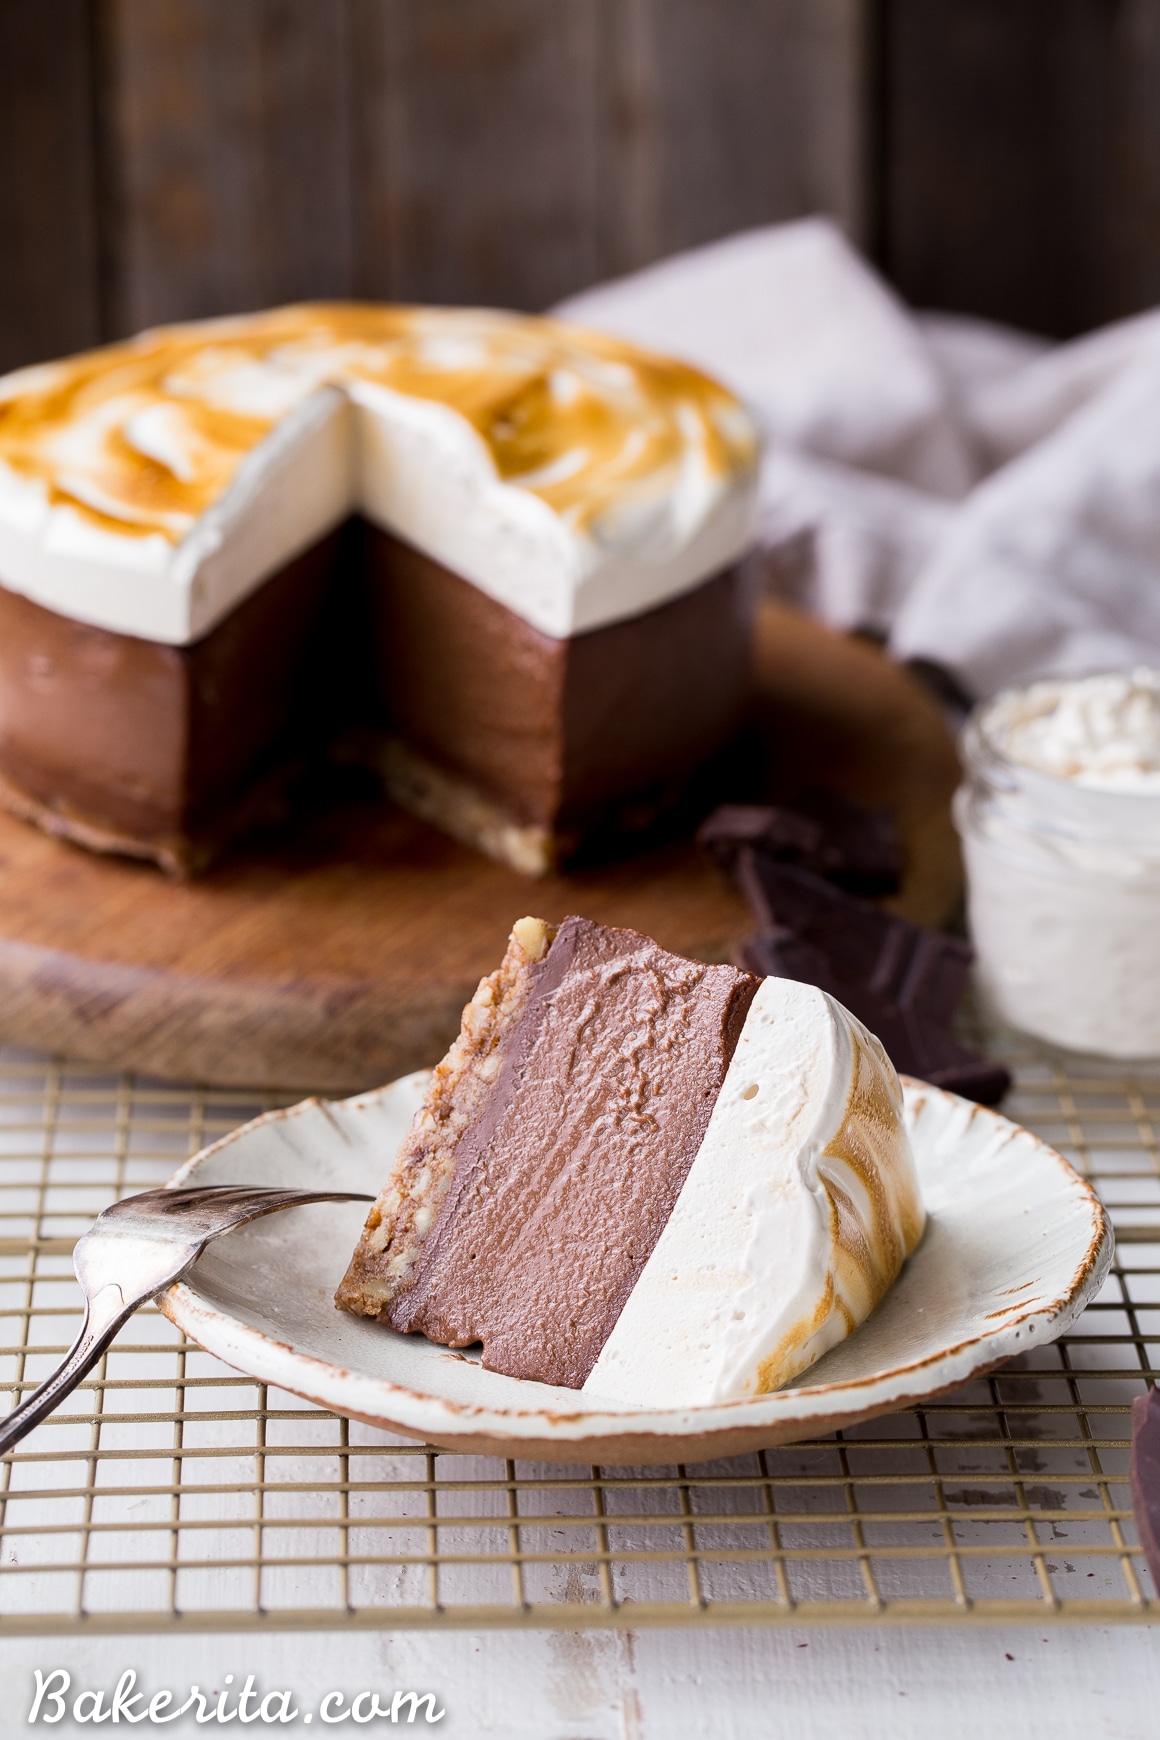 This No Bake S'mores Cheesecake has a graham cracker flavored crust topped with chocolate ganache, rich chocolate "cheesecake" made with soaked cashews, and a layer of homemade toasted marshmallow on top! You'd never guess this decadent dessert is gluten-free, dairy-free, and Paleo.